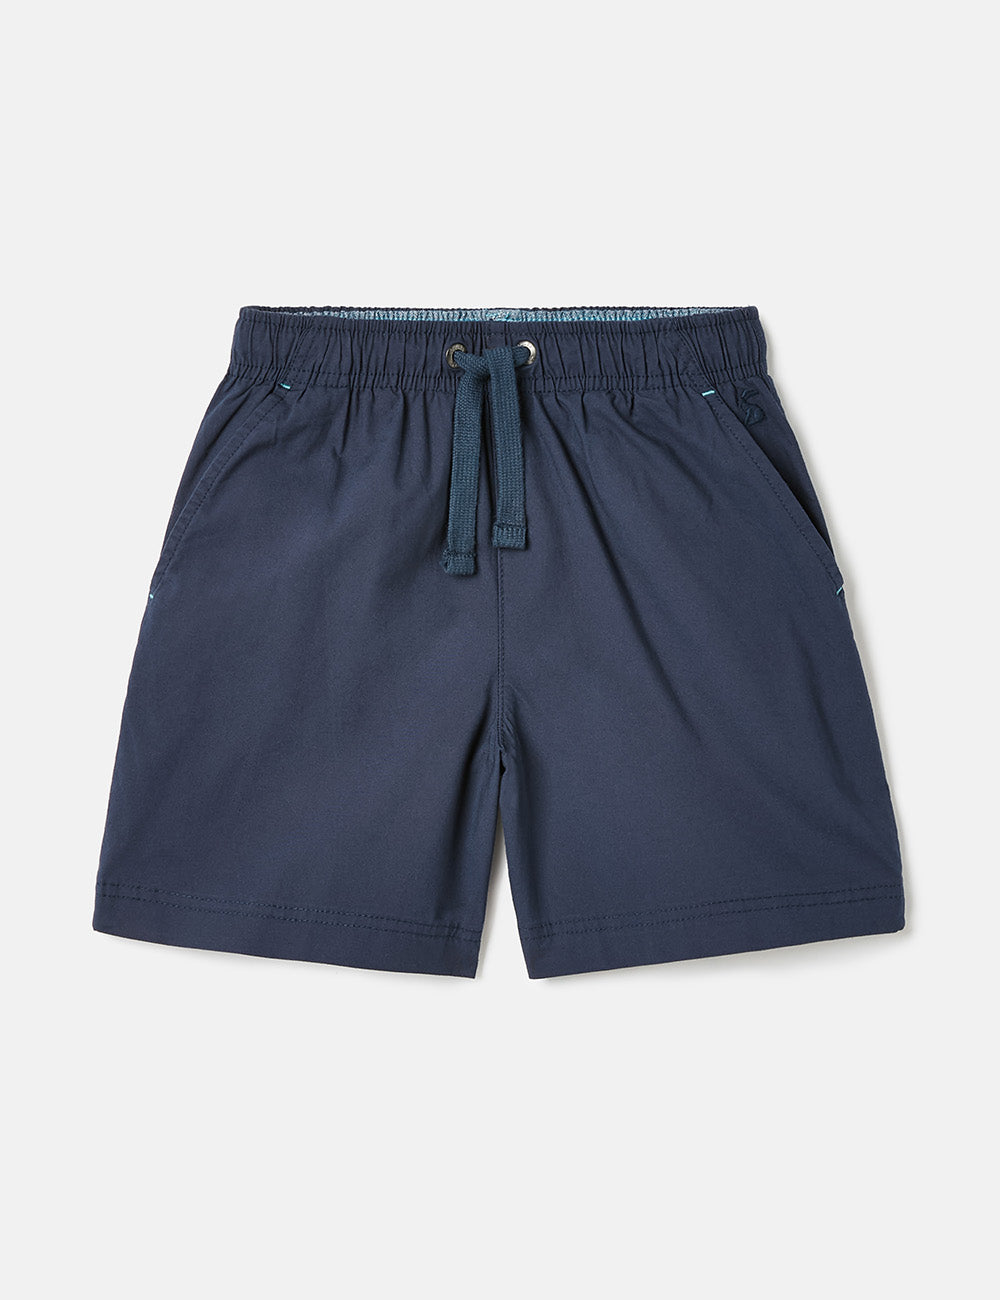 Joules Quayside Chino Short - French Navy